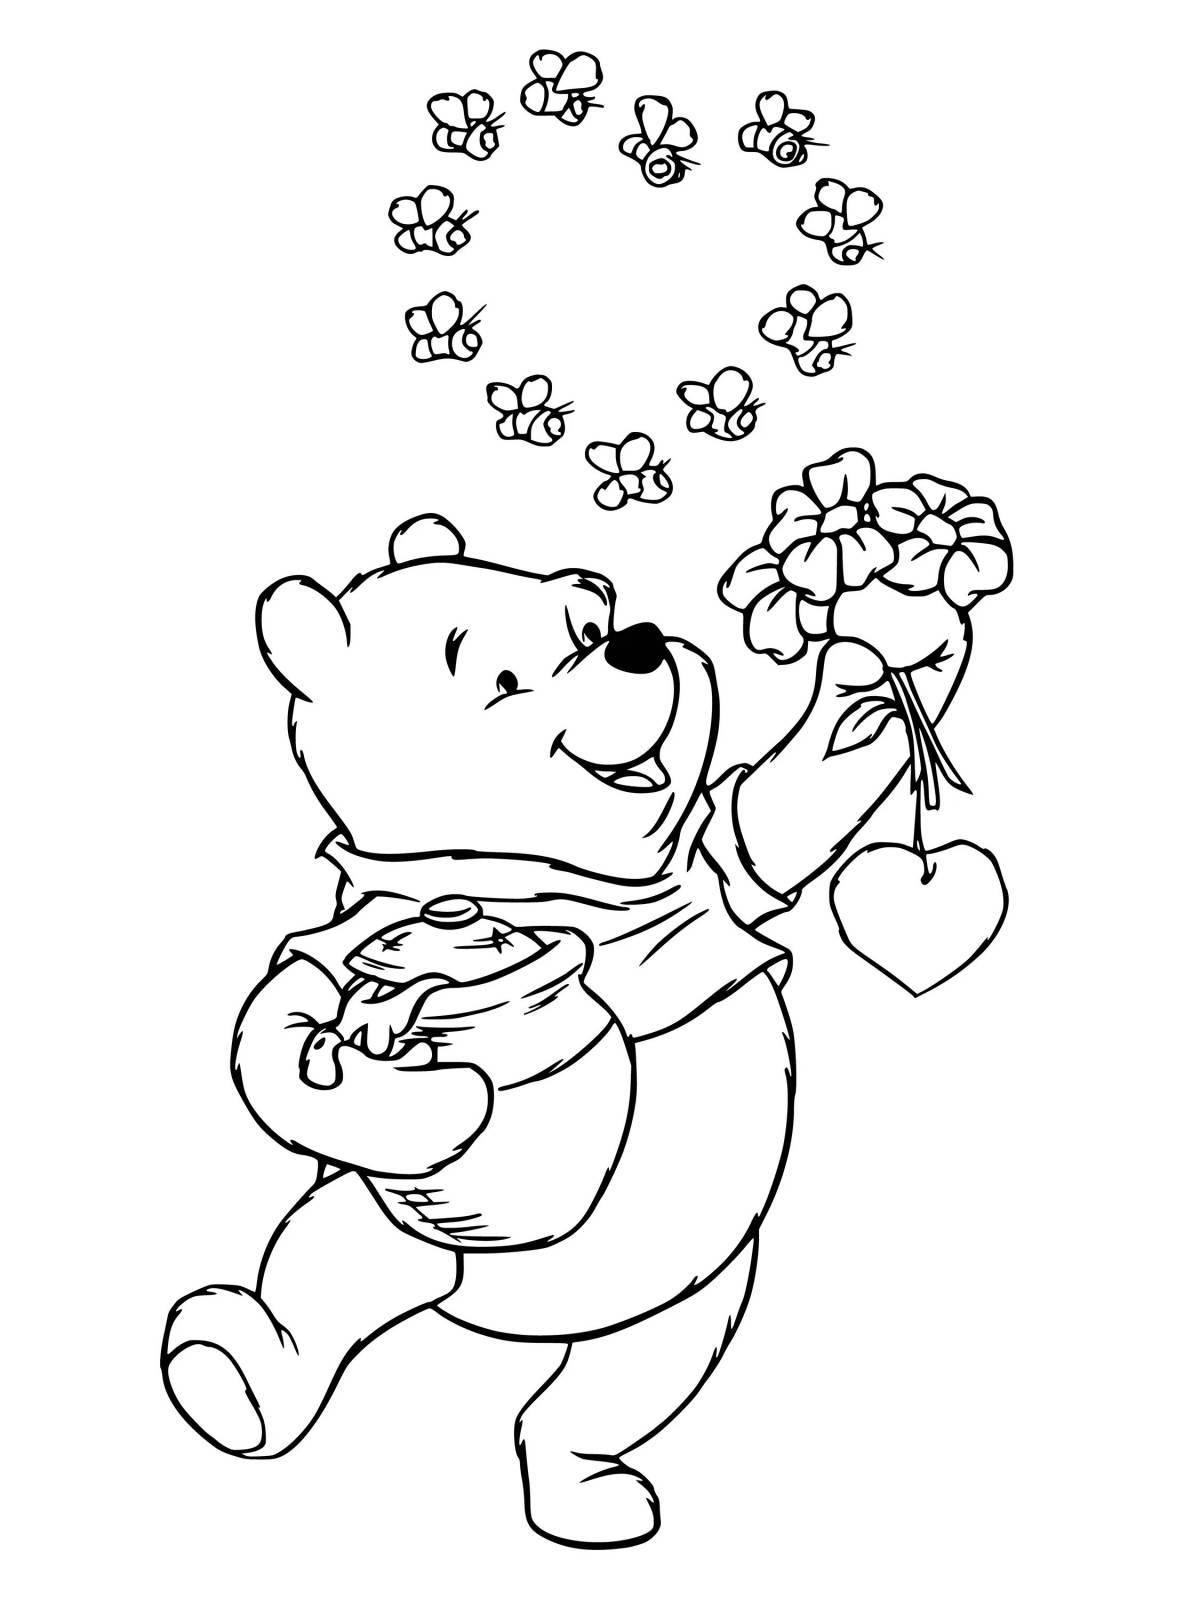 Live bear with flowers